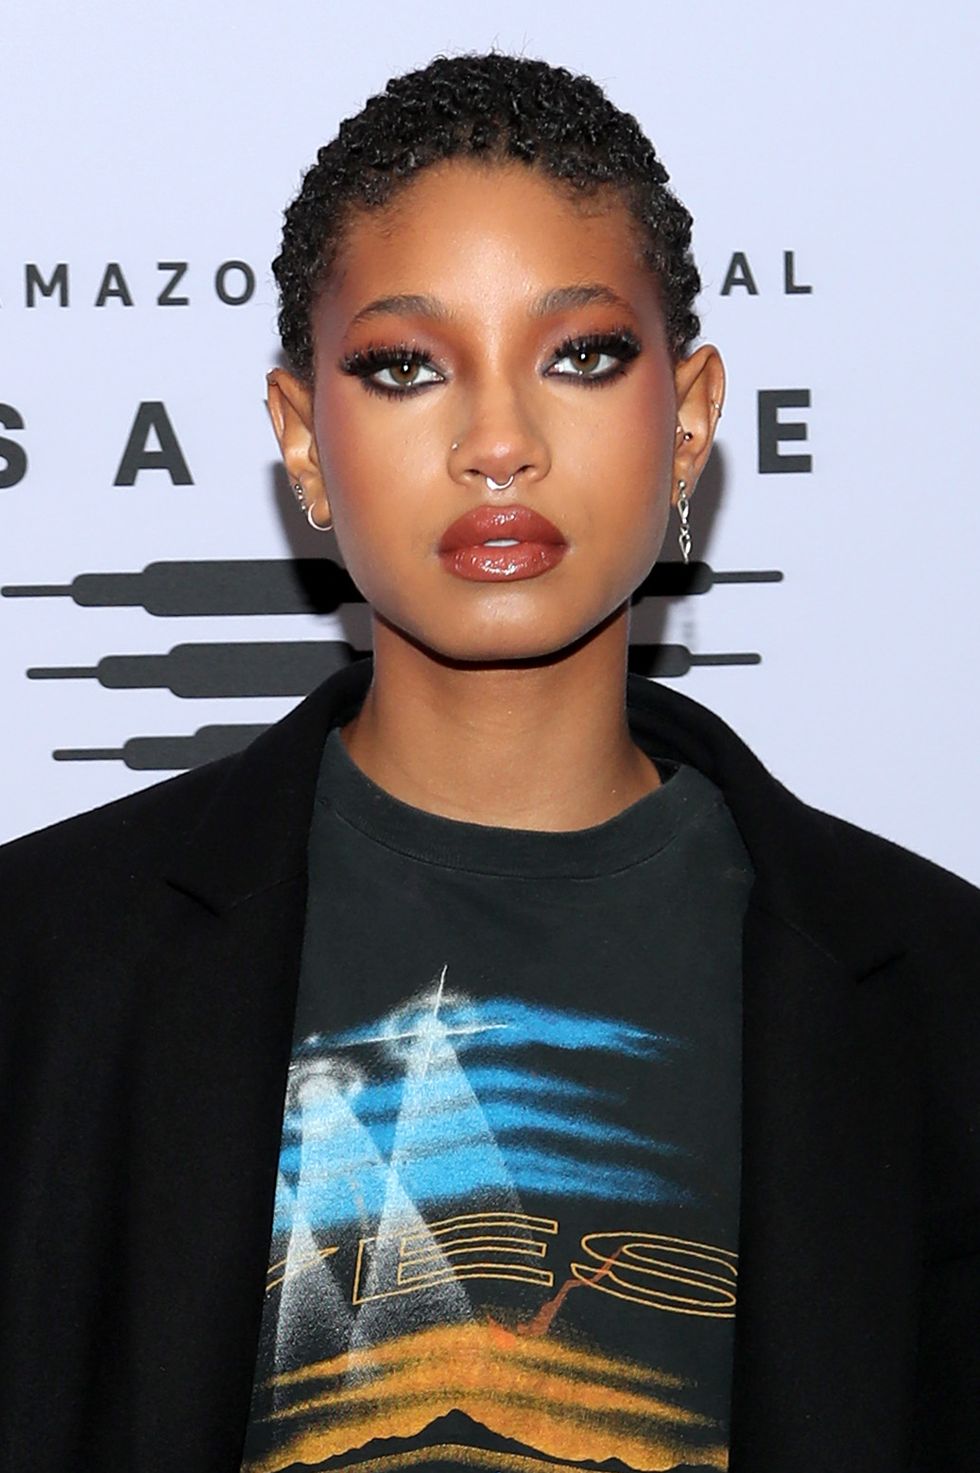 los angeles, california   october 02 in this image released on october 2, willow smith attends rihannas savage x fenty show vol 2 presented by amazon prime video at the los angeles convention center in los angeles, california and broadcast on october 2, 2020 photo by jerritt clarkgetty images for savage x fenty show vol 2 presented by amazon prime video